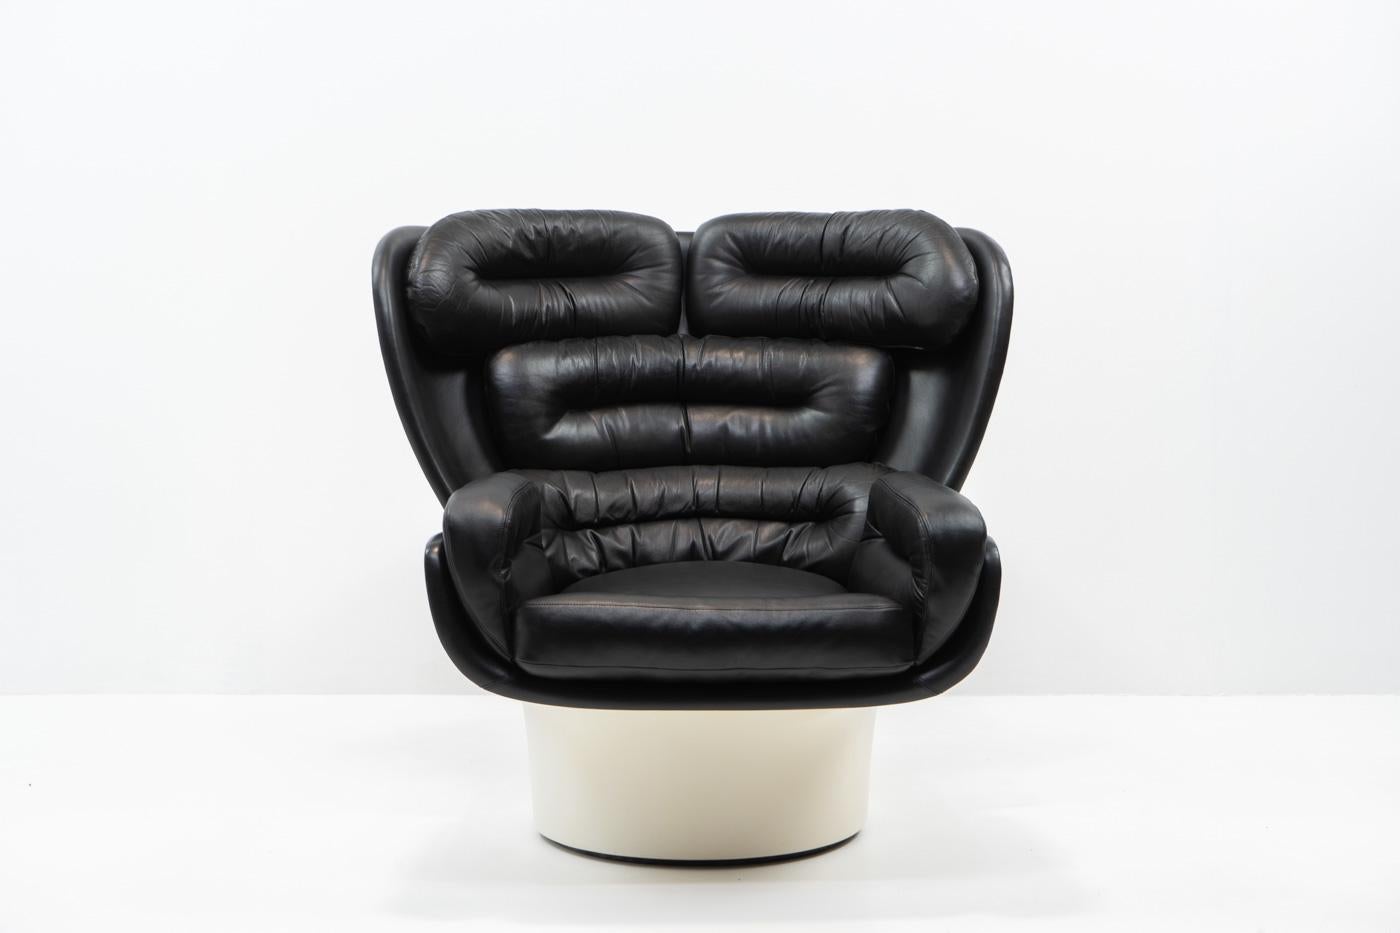 The Elda Chair by Joe Colombo (1963) is a post-war design masterpiece: 

The design is still today considered futuristic, with its moulded fiberglass shell and swivelling base, offering comfort and mobility.

This lounge chair, with its distinctive